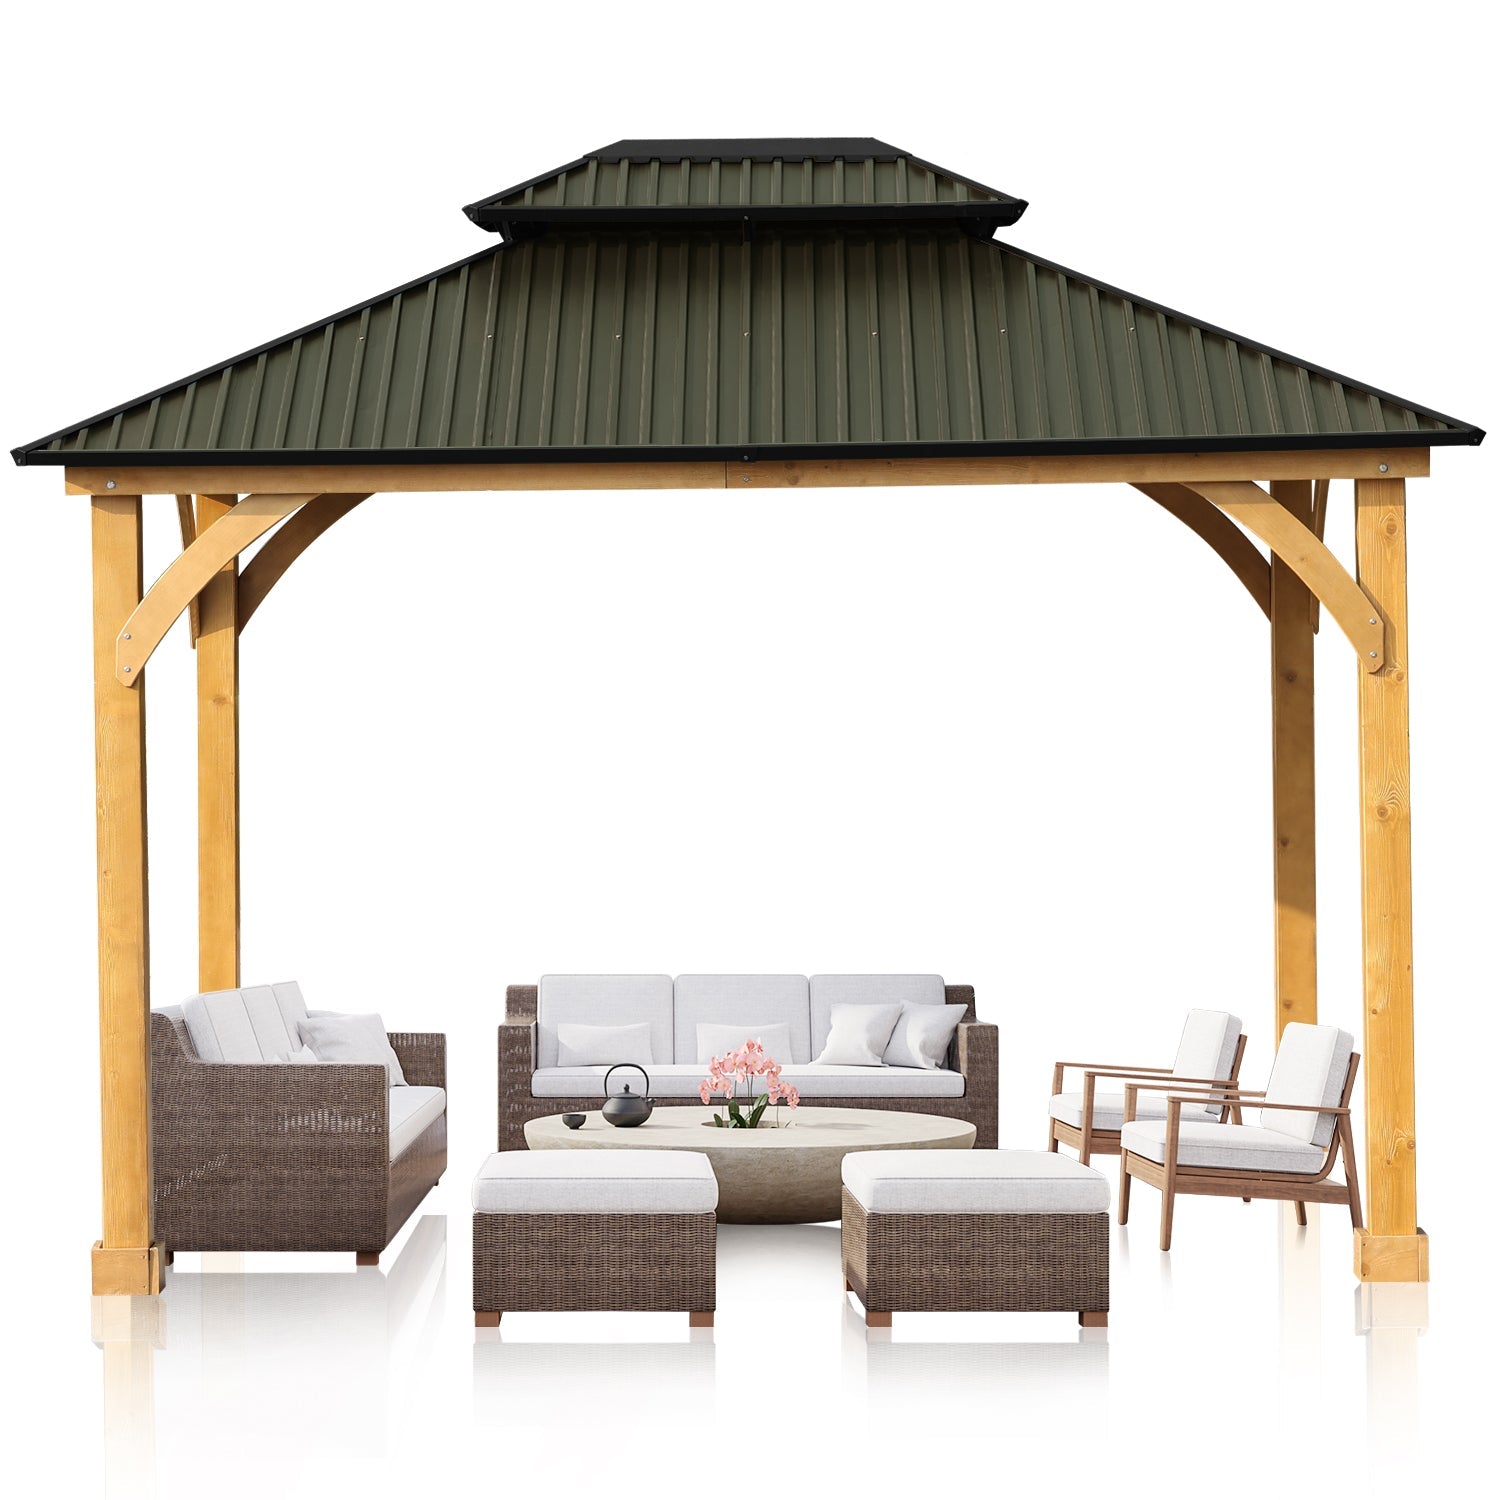 12 x 10 ft. Outdoor Solid Wooden Frame Gazebo with 2-Tier Hardtop Roof, for Patio Backyard Deck and Lawns - Aoodor